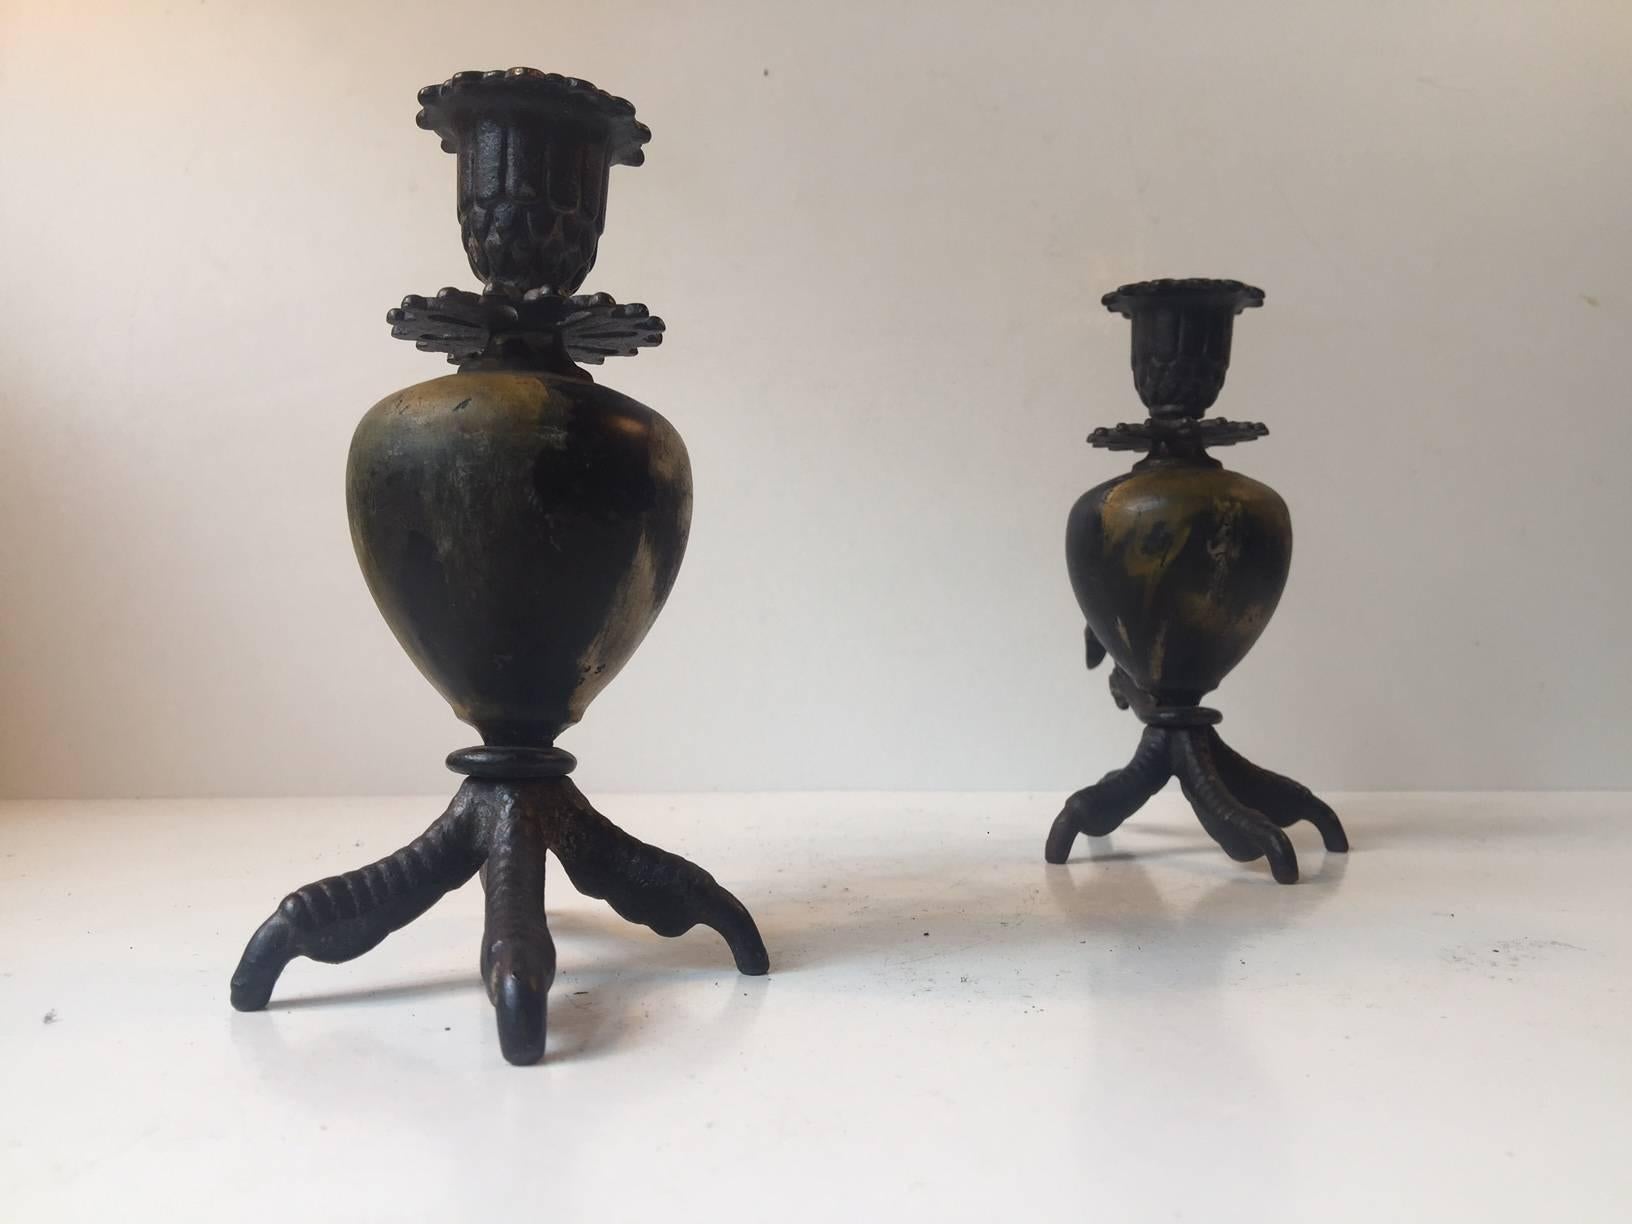 Wrought Iron Gothic Talon, Rooster Claw Chamber Candlesticks, Early 20th Century For Sale